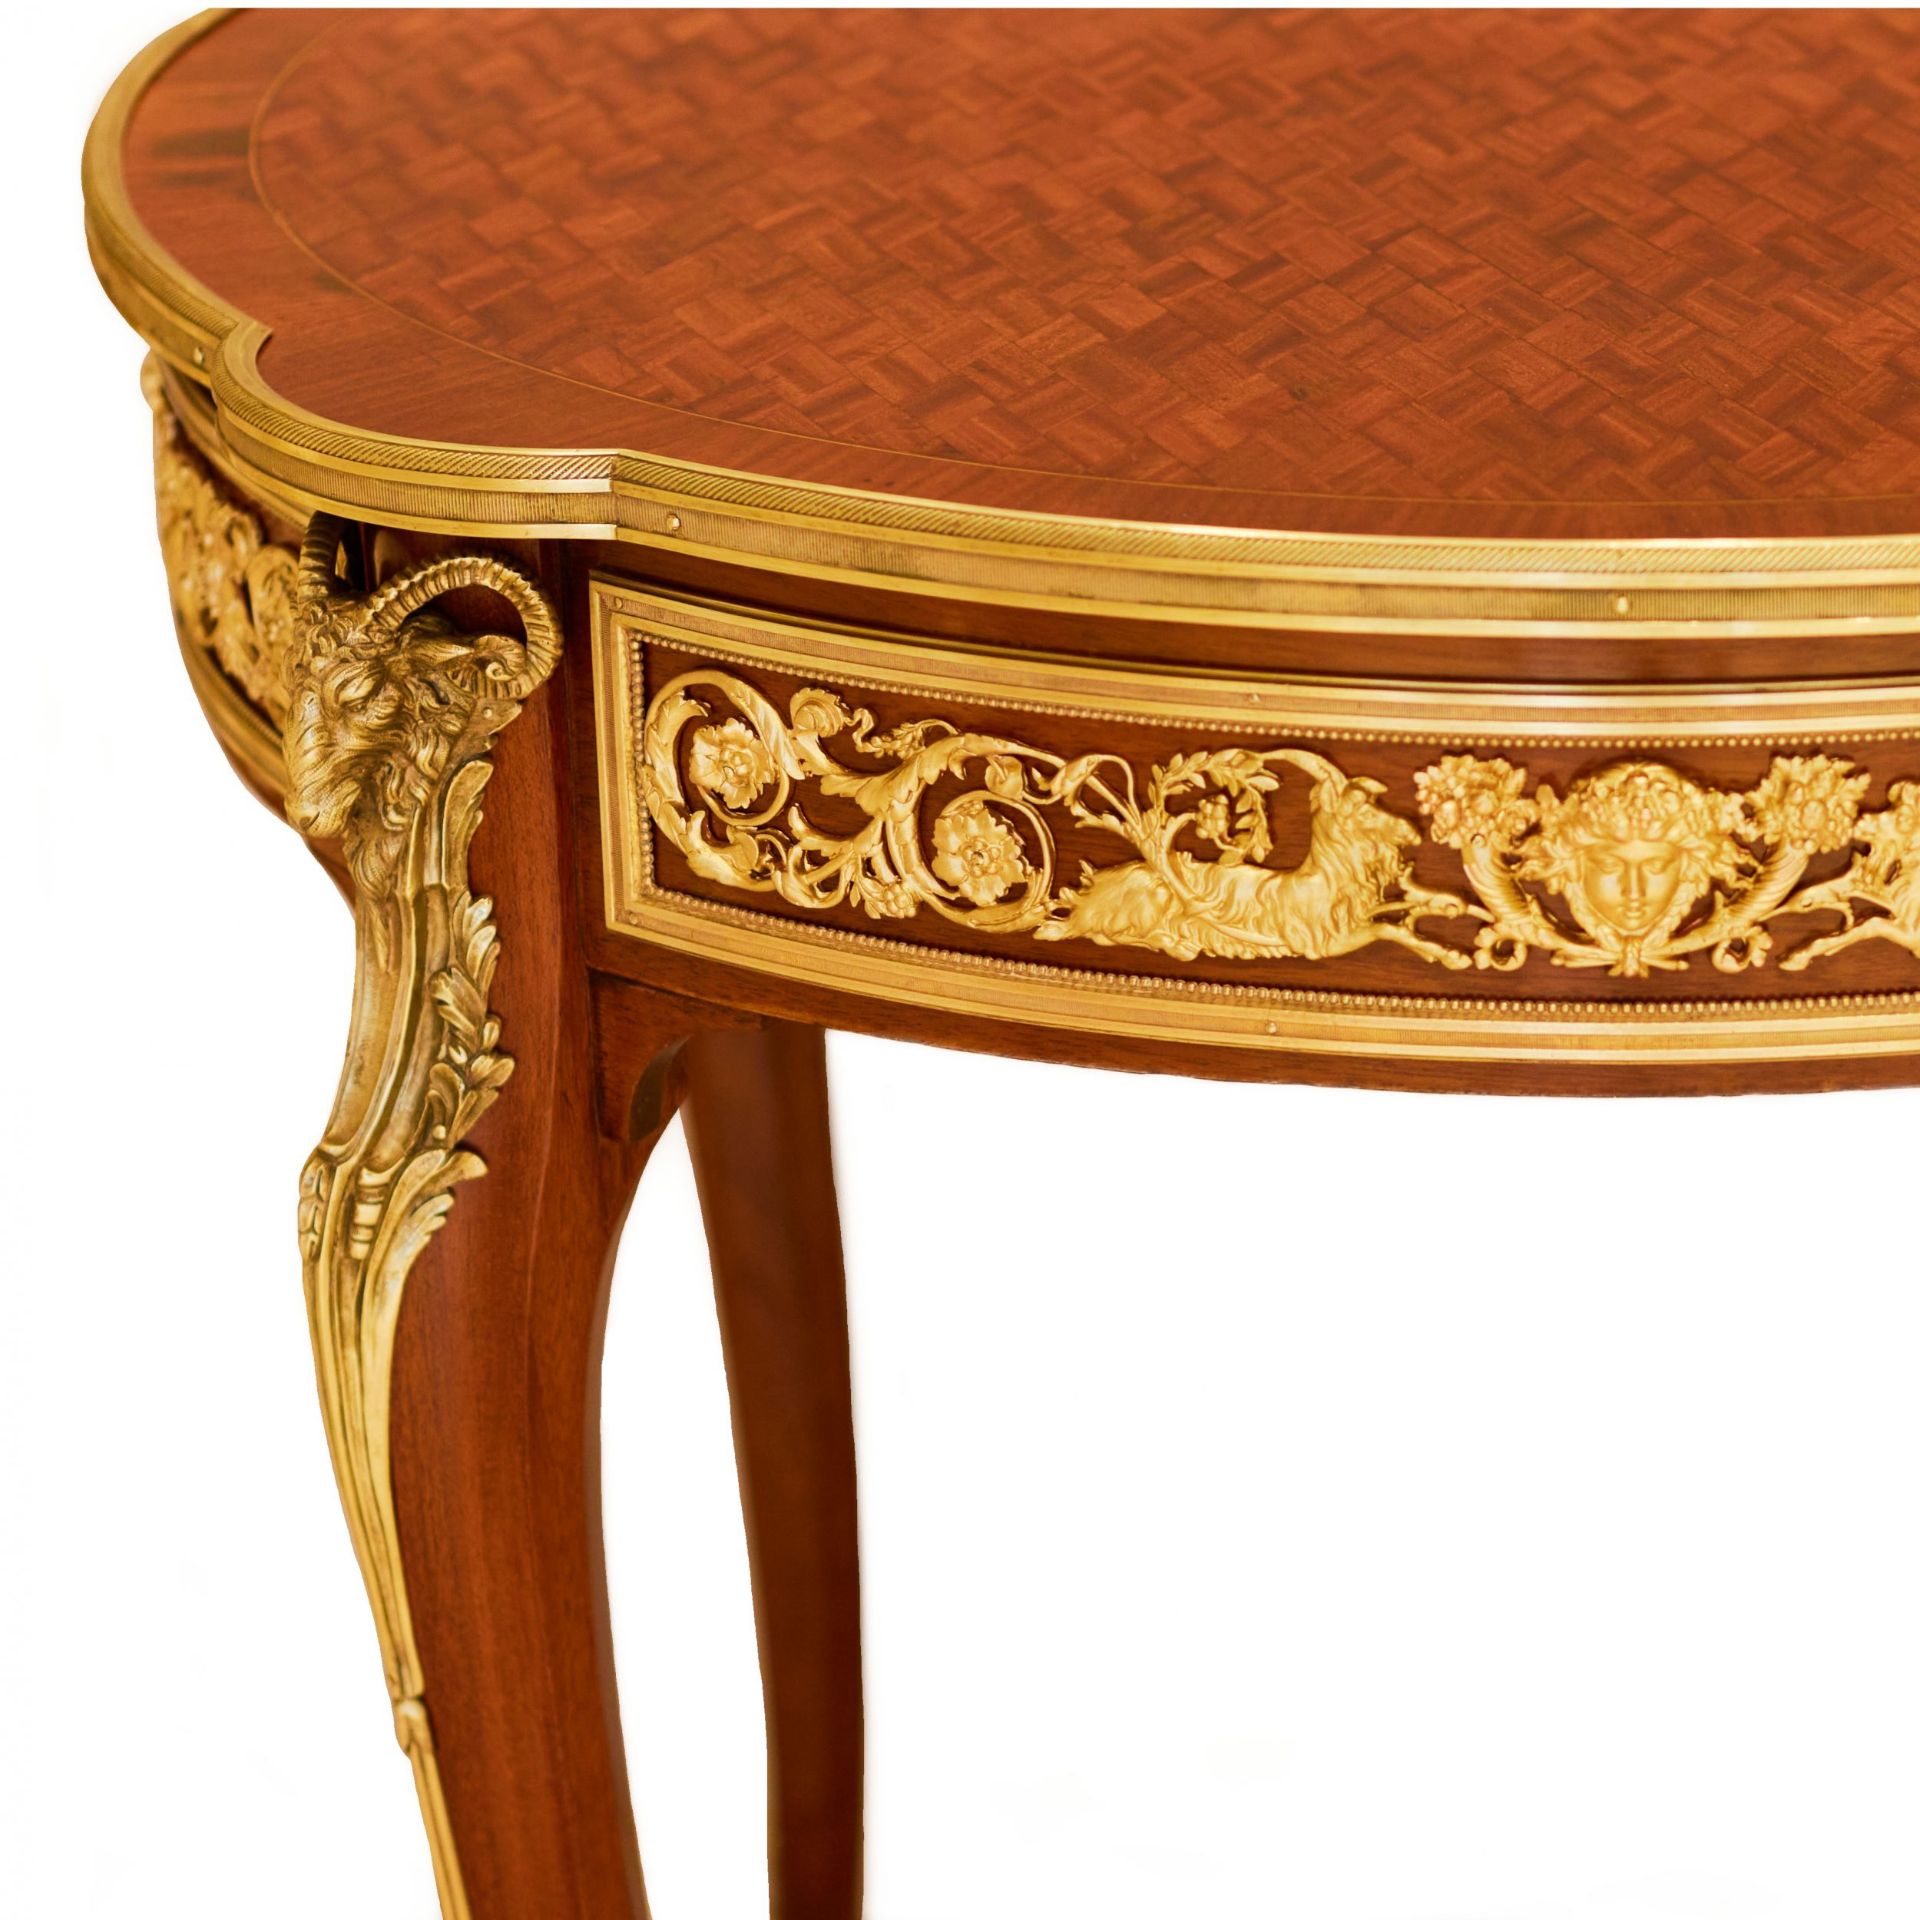 Mahogany table decorated with marquetry in the style of Louis XV, Francois Linke. Late 19th century - Image 6 of 6